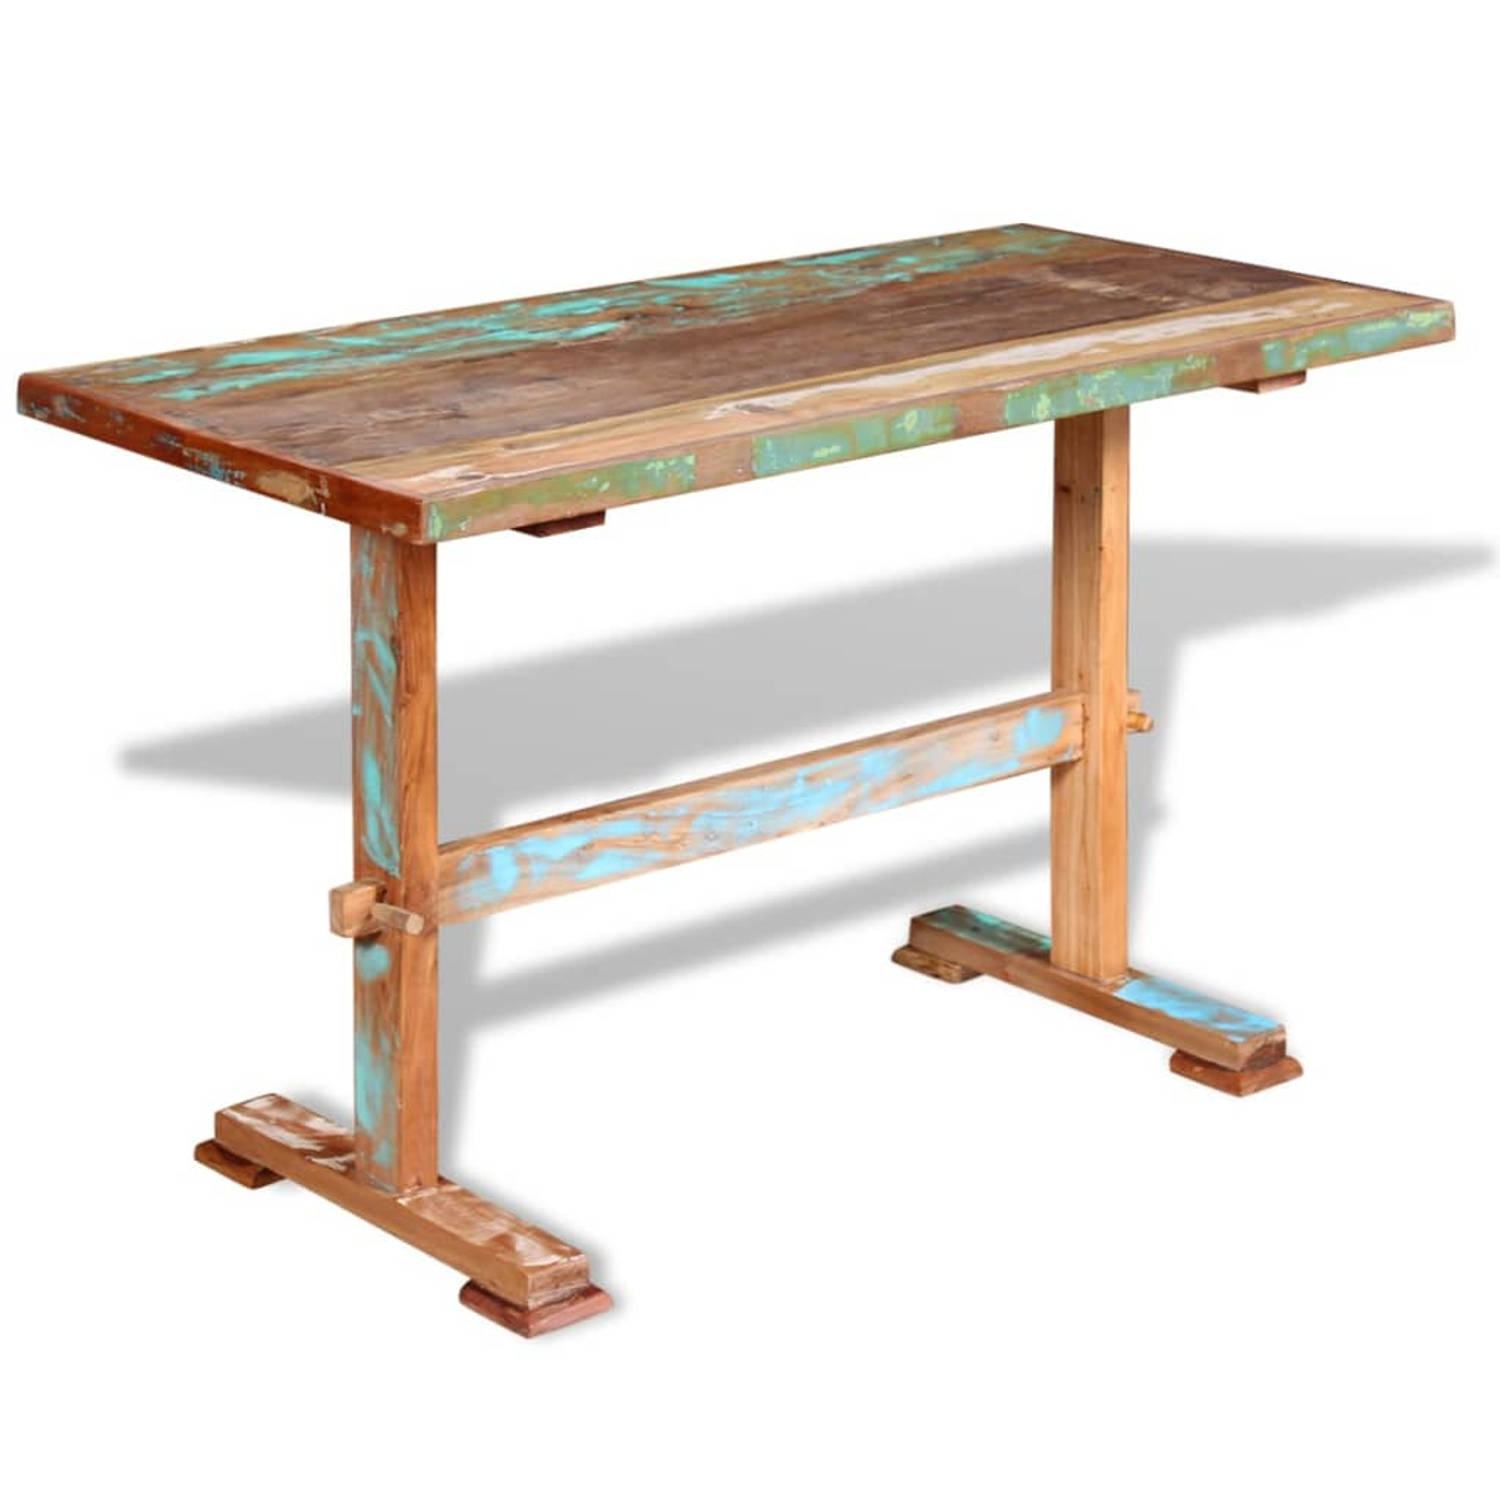 The Living Store Eettafel Vintage Massief gerecycled hout 120x58x78 cm Bruin